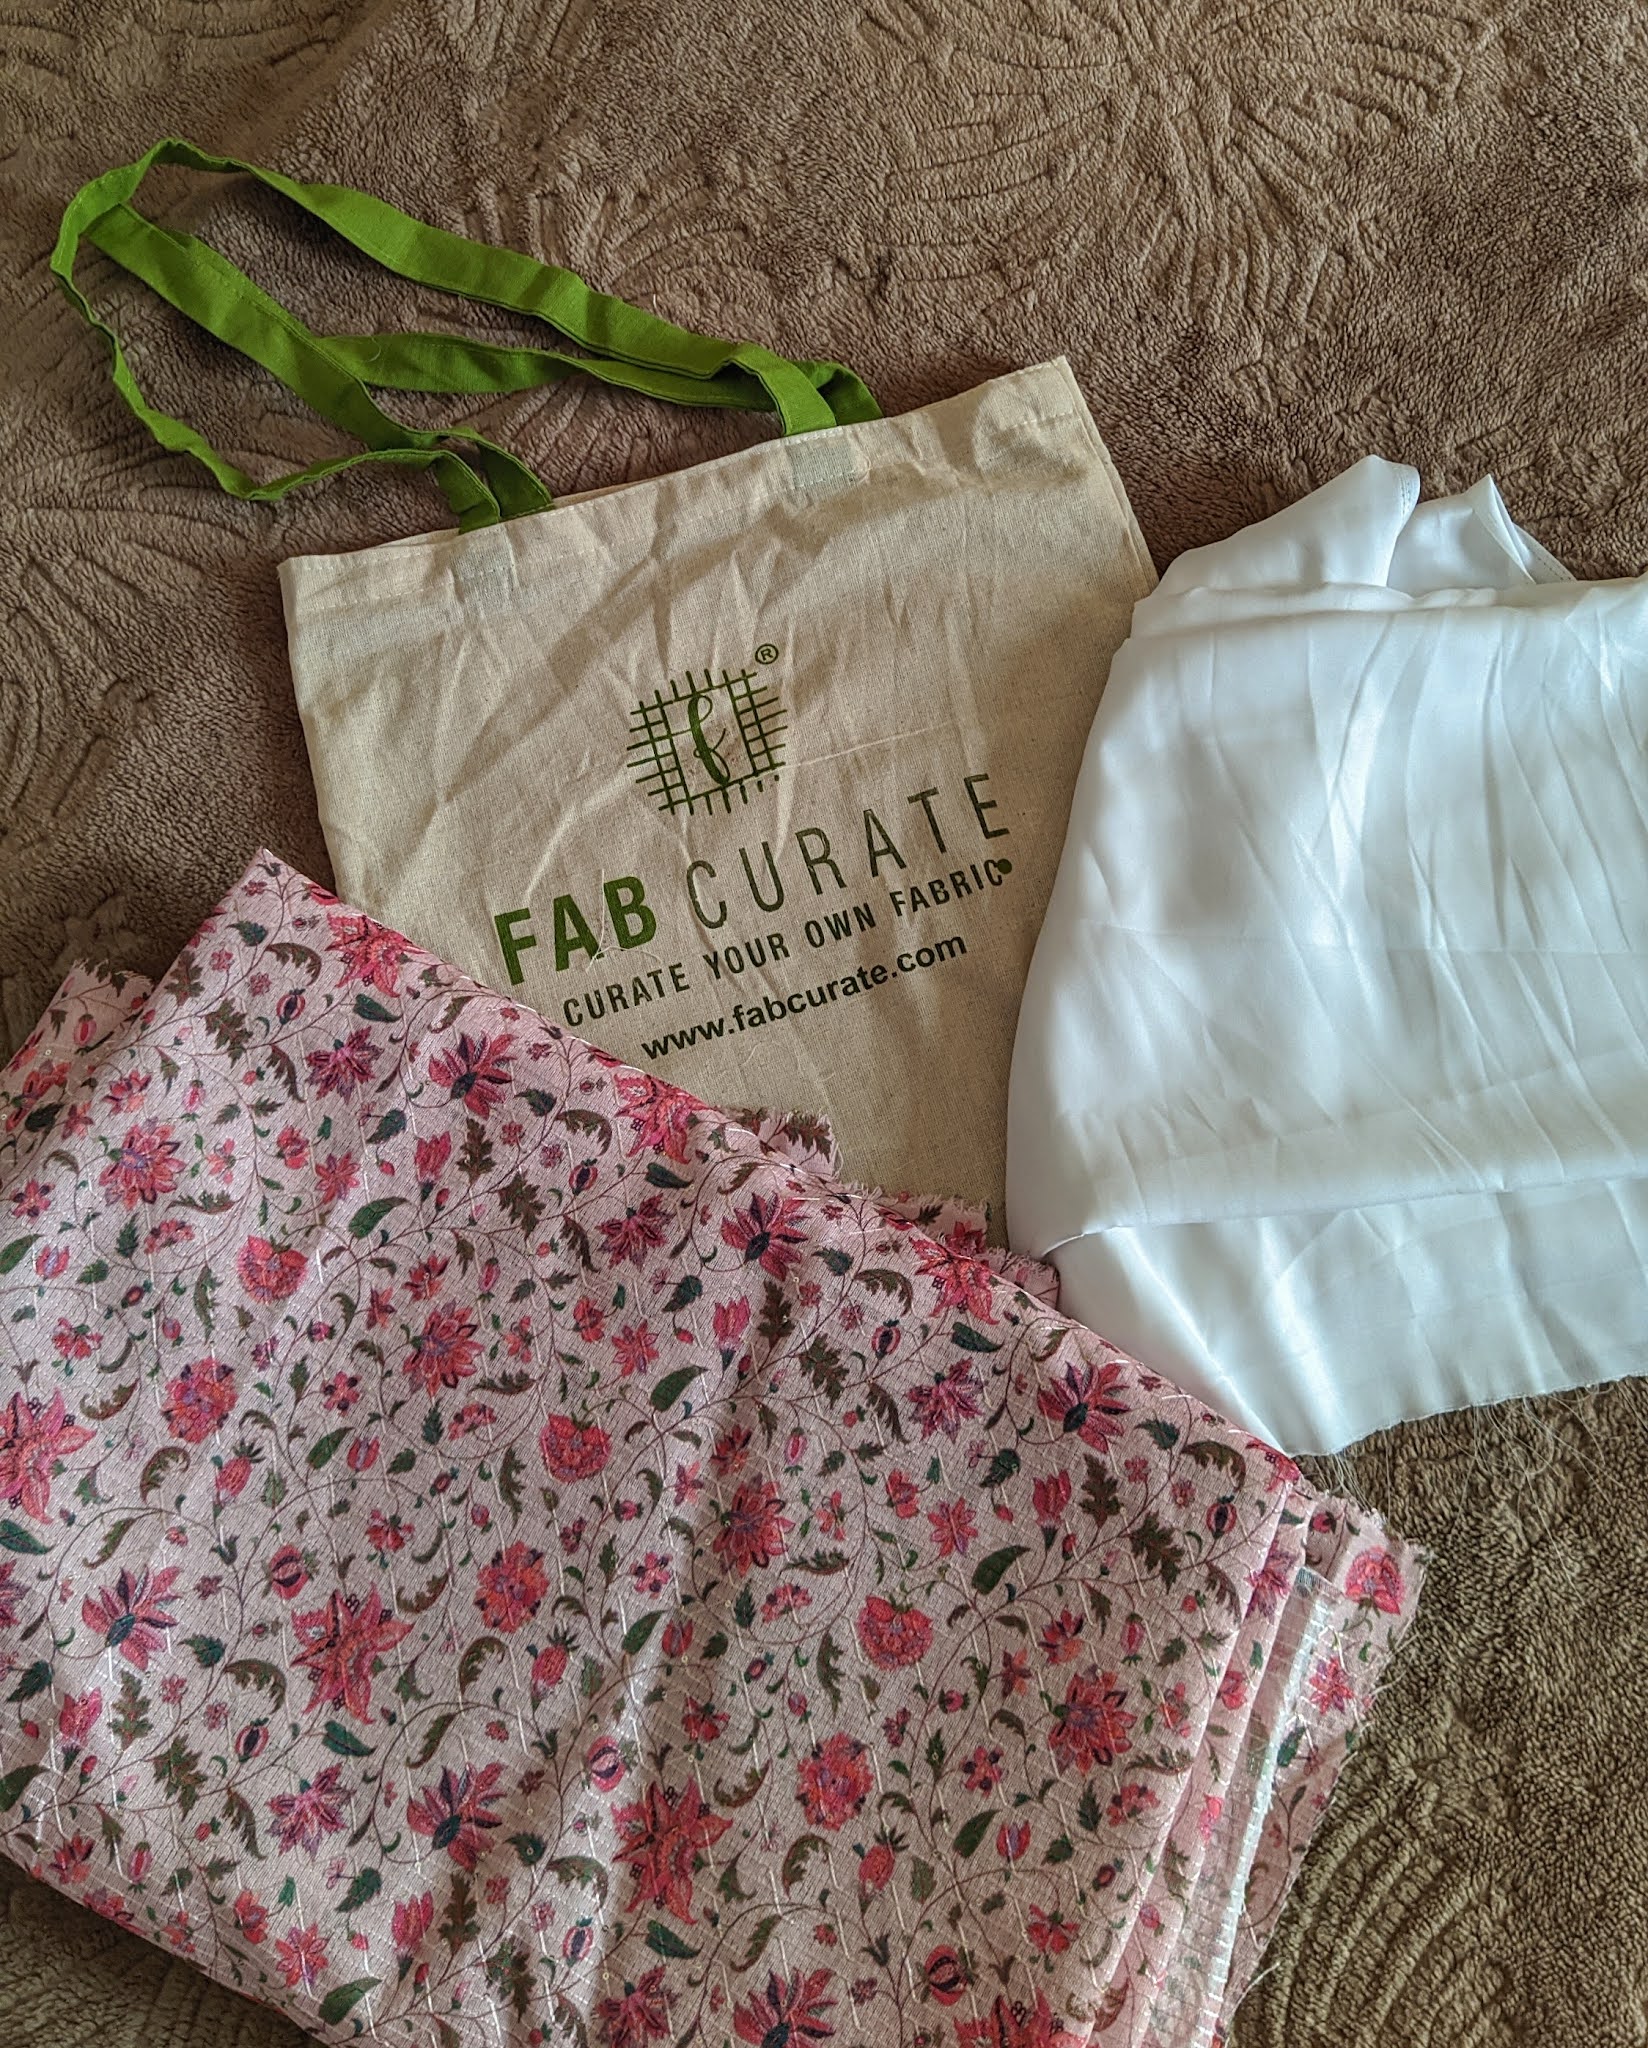 Check out Fabcurate for its Quality Fabrics